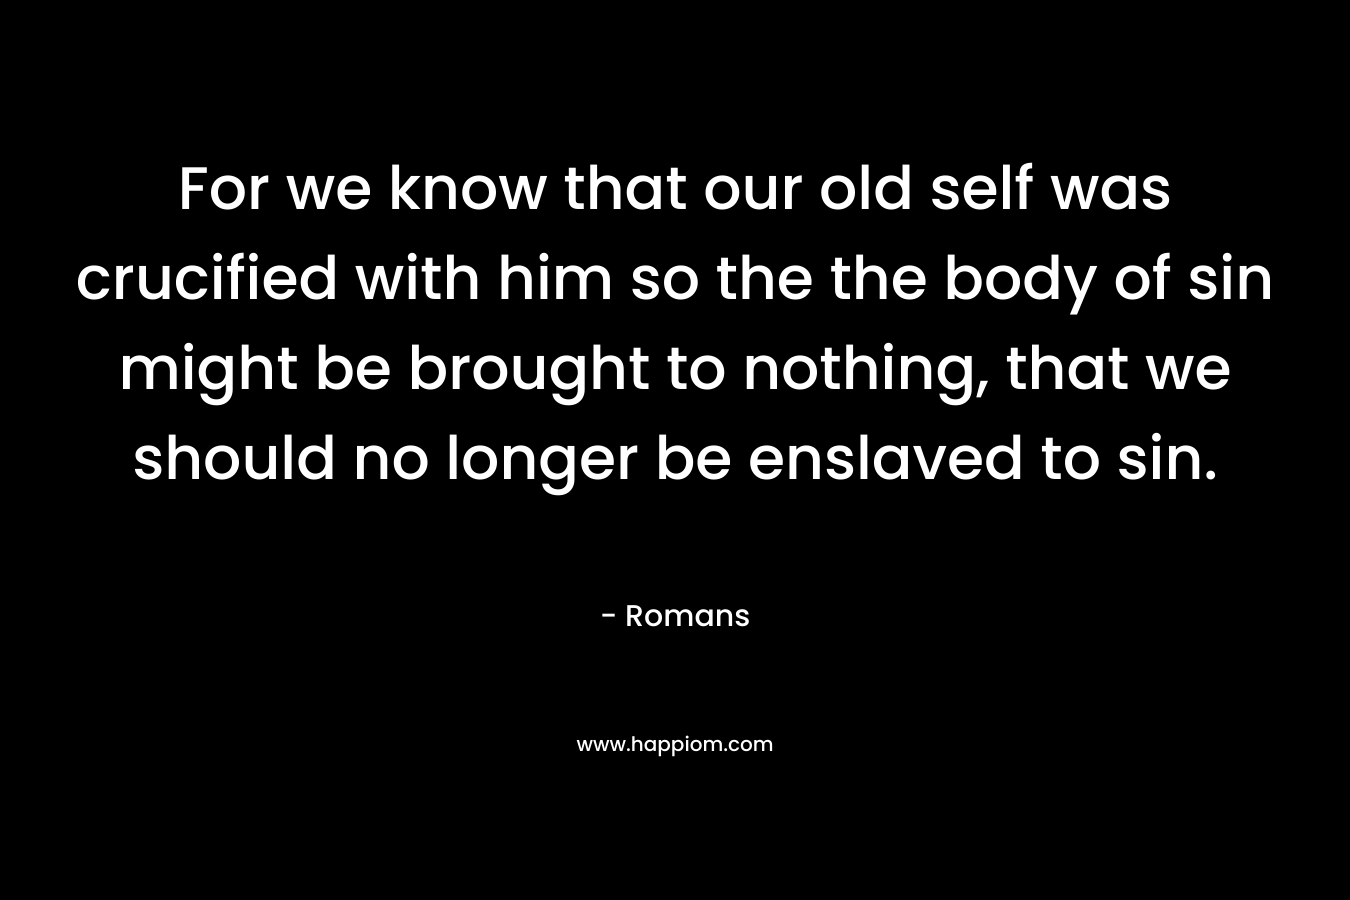 For we know that our old self was crucified with him so the the body of sin might be brought to nothing, that we should no longer be enslaved to sin.